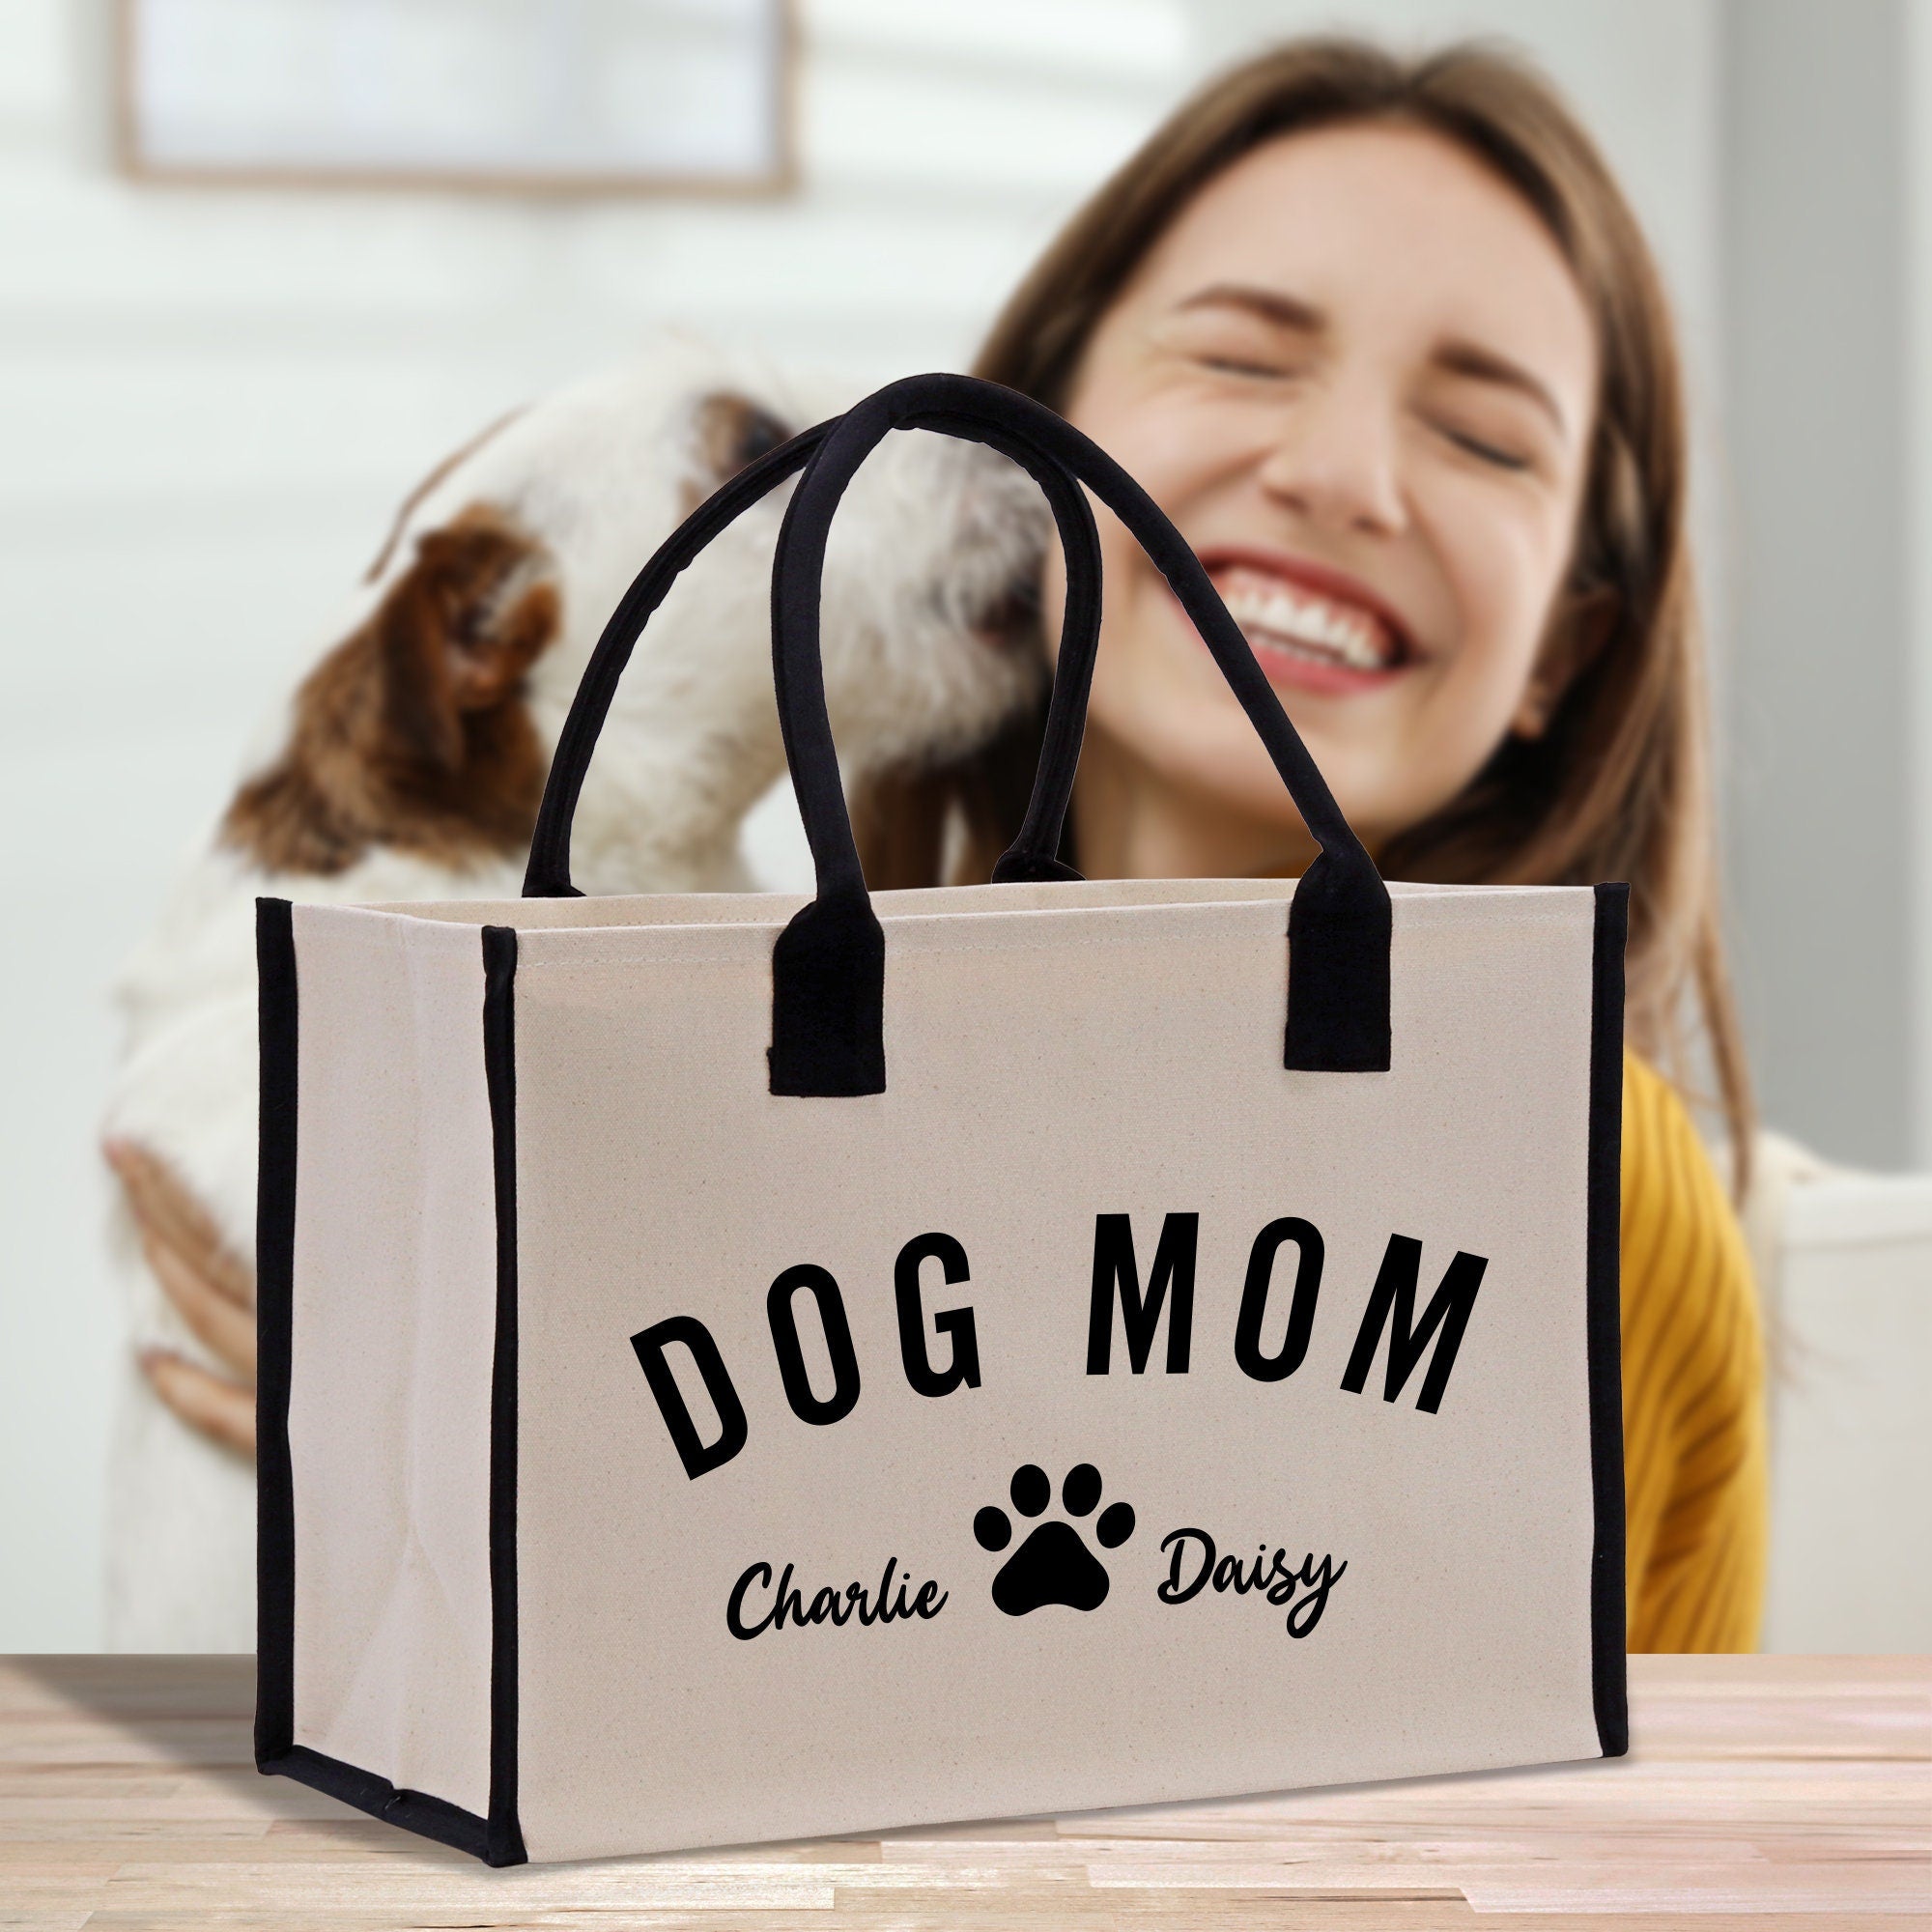 a woman sitting at a table with a dog in a bag